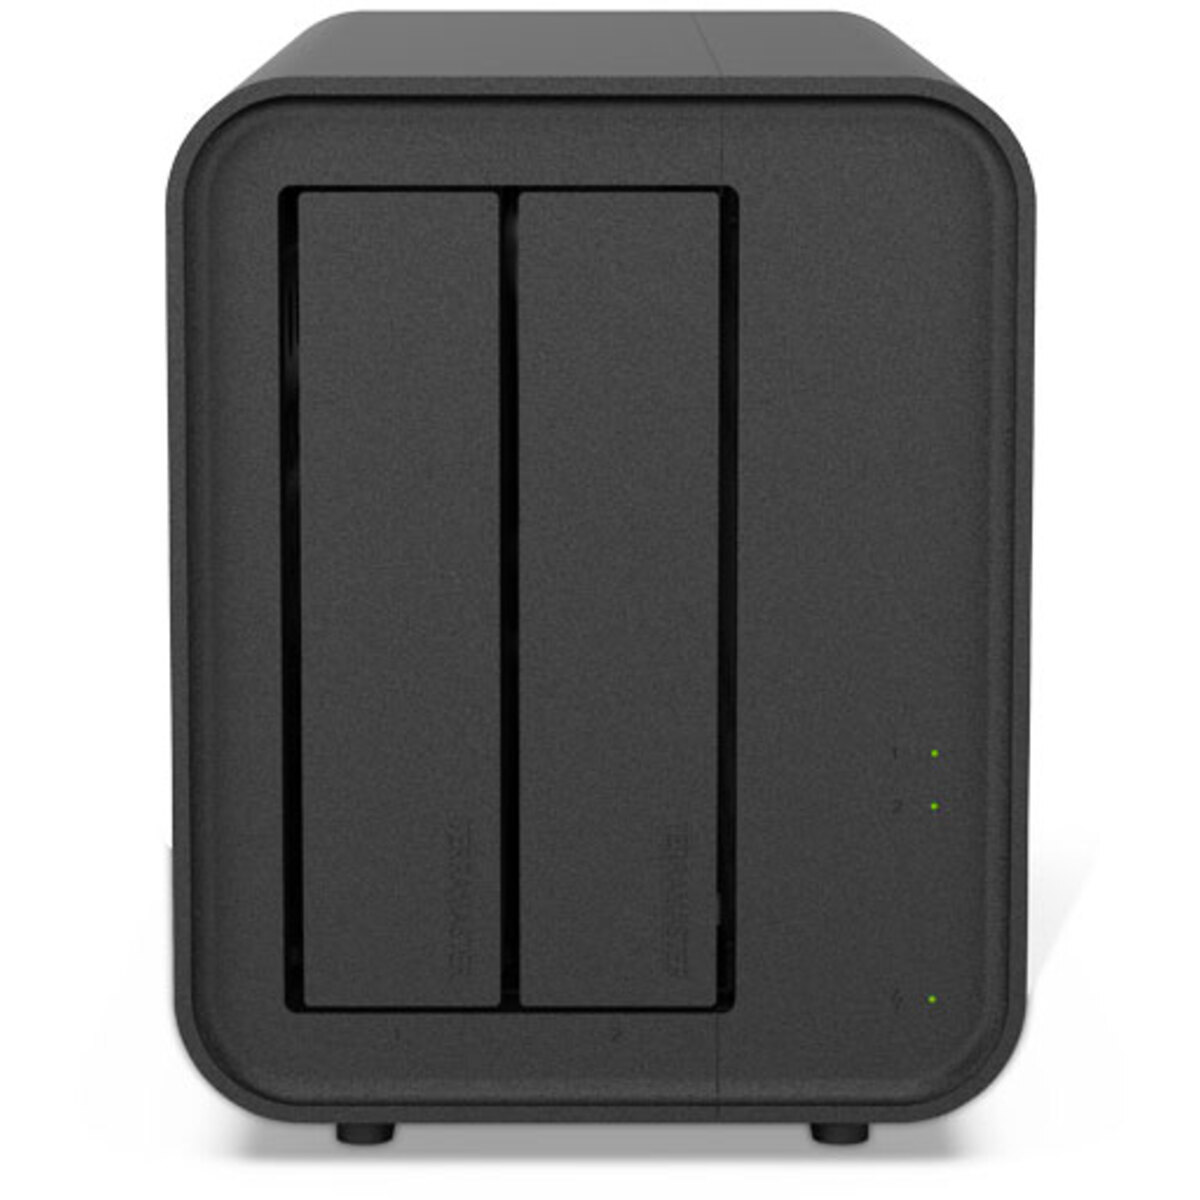 TerraMaster D5 Hybrid 8tb 2-Bay Desktop Multimedia / Power User / Business DAS - Direct Attached Storage Device 1x8tb Seagate IronWolf Pro ST8000NT001 3.5 7200rpm SATA 6Gb/s HDD NAS Class Drives Installed - Burn-In Tested - ON SALE D5 Hybrid